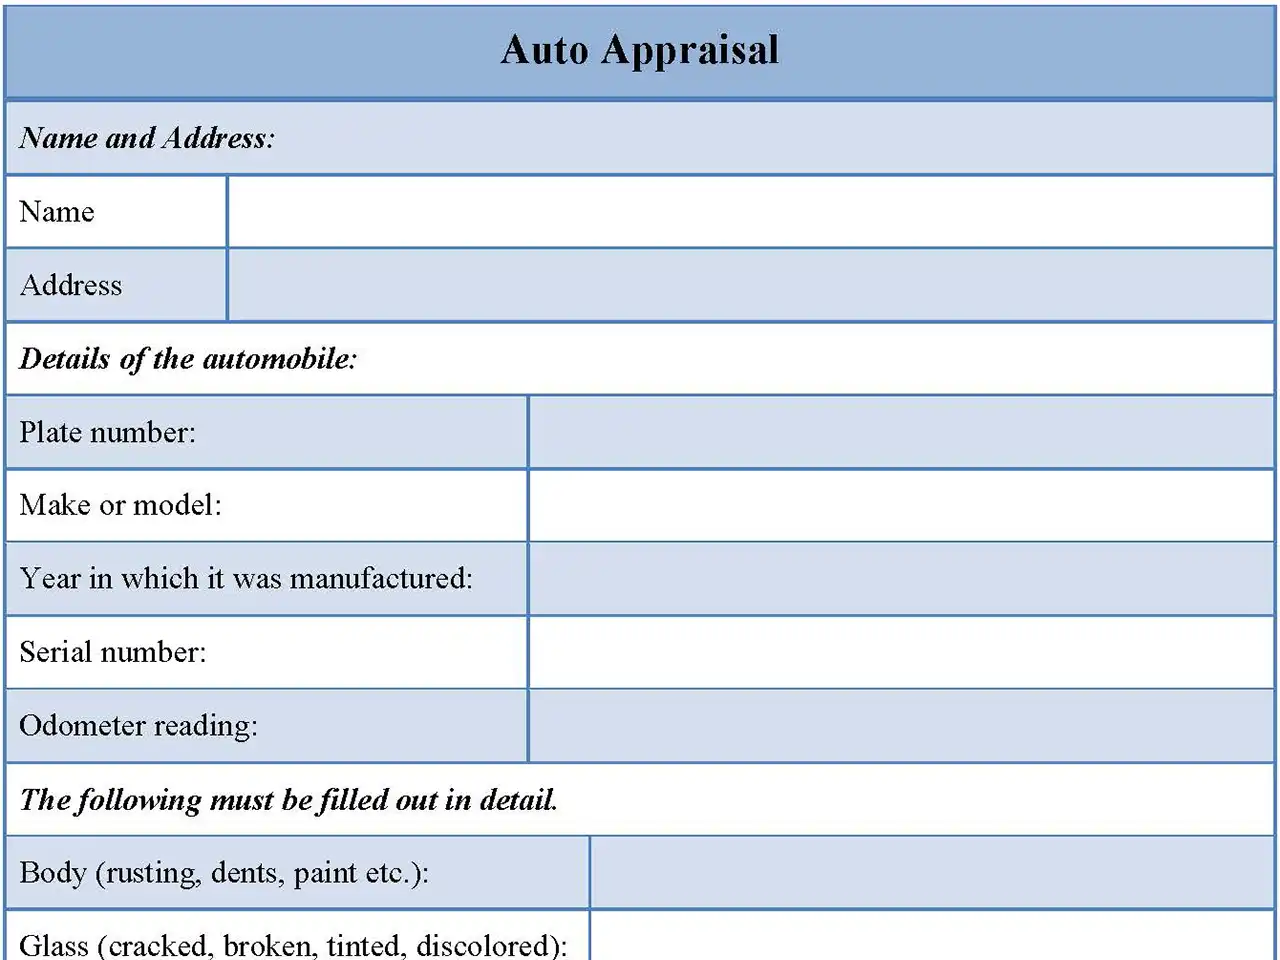 Auto Appraisal Fillable PDF Form And Word Document